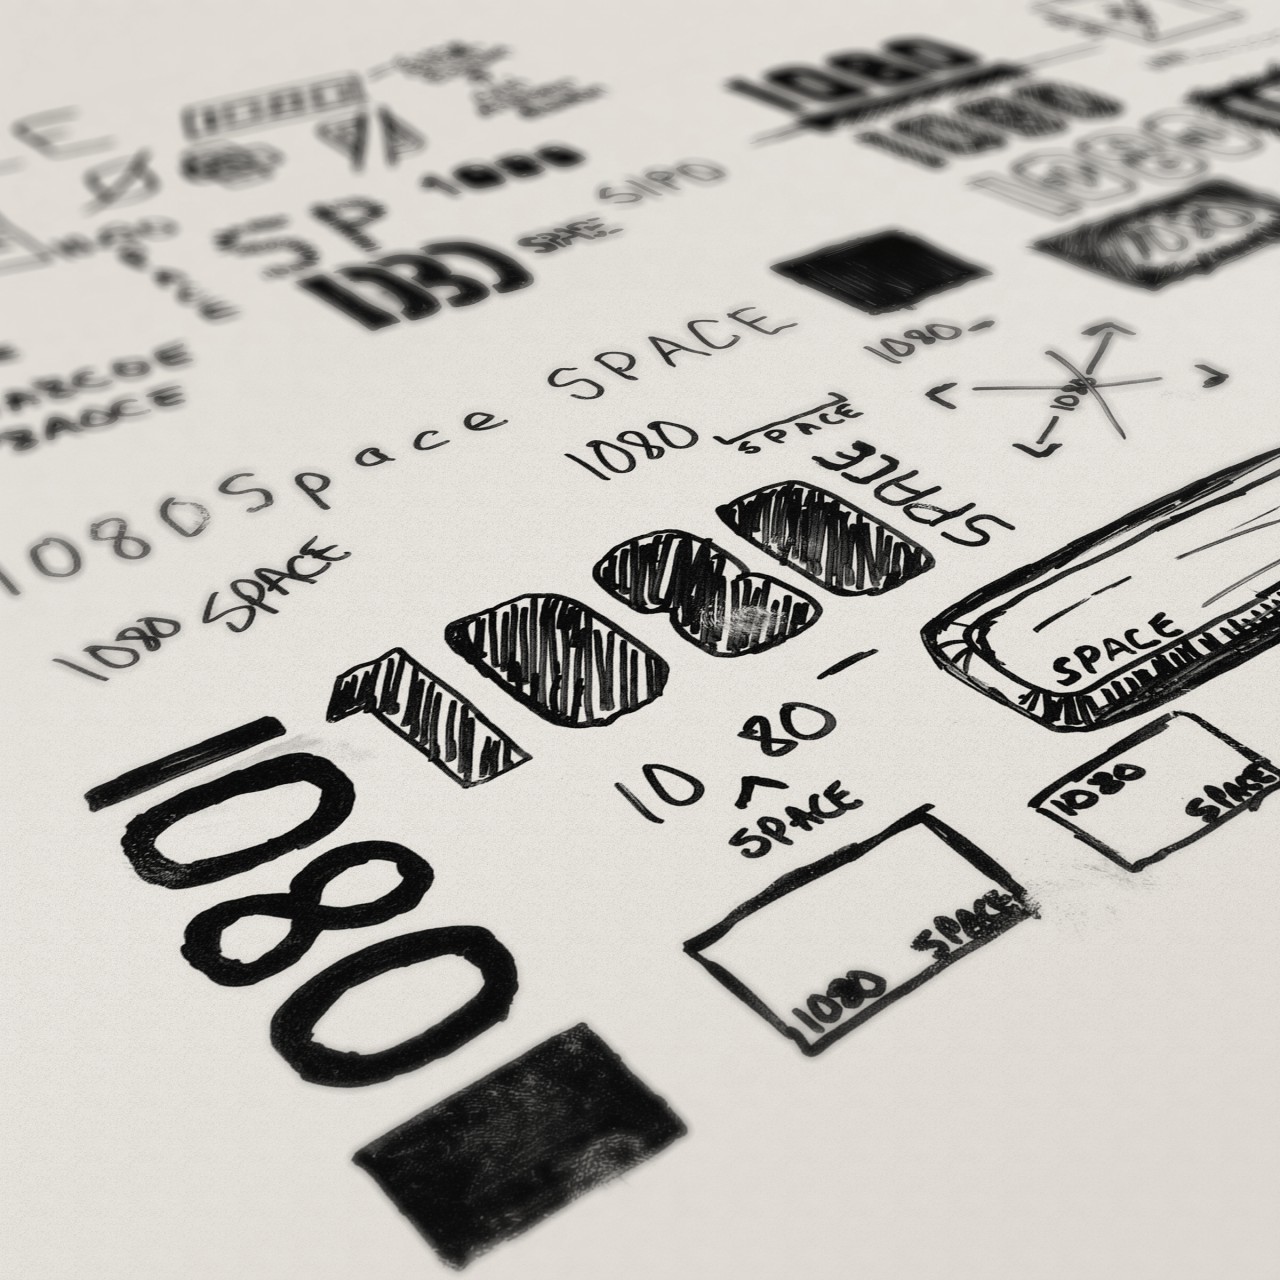 Image of 1080 Space logo process sketches